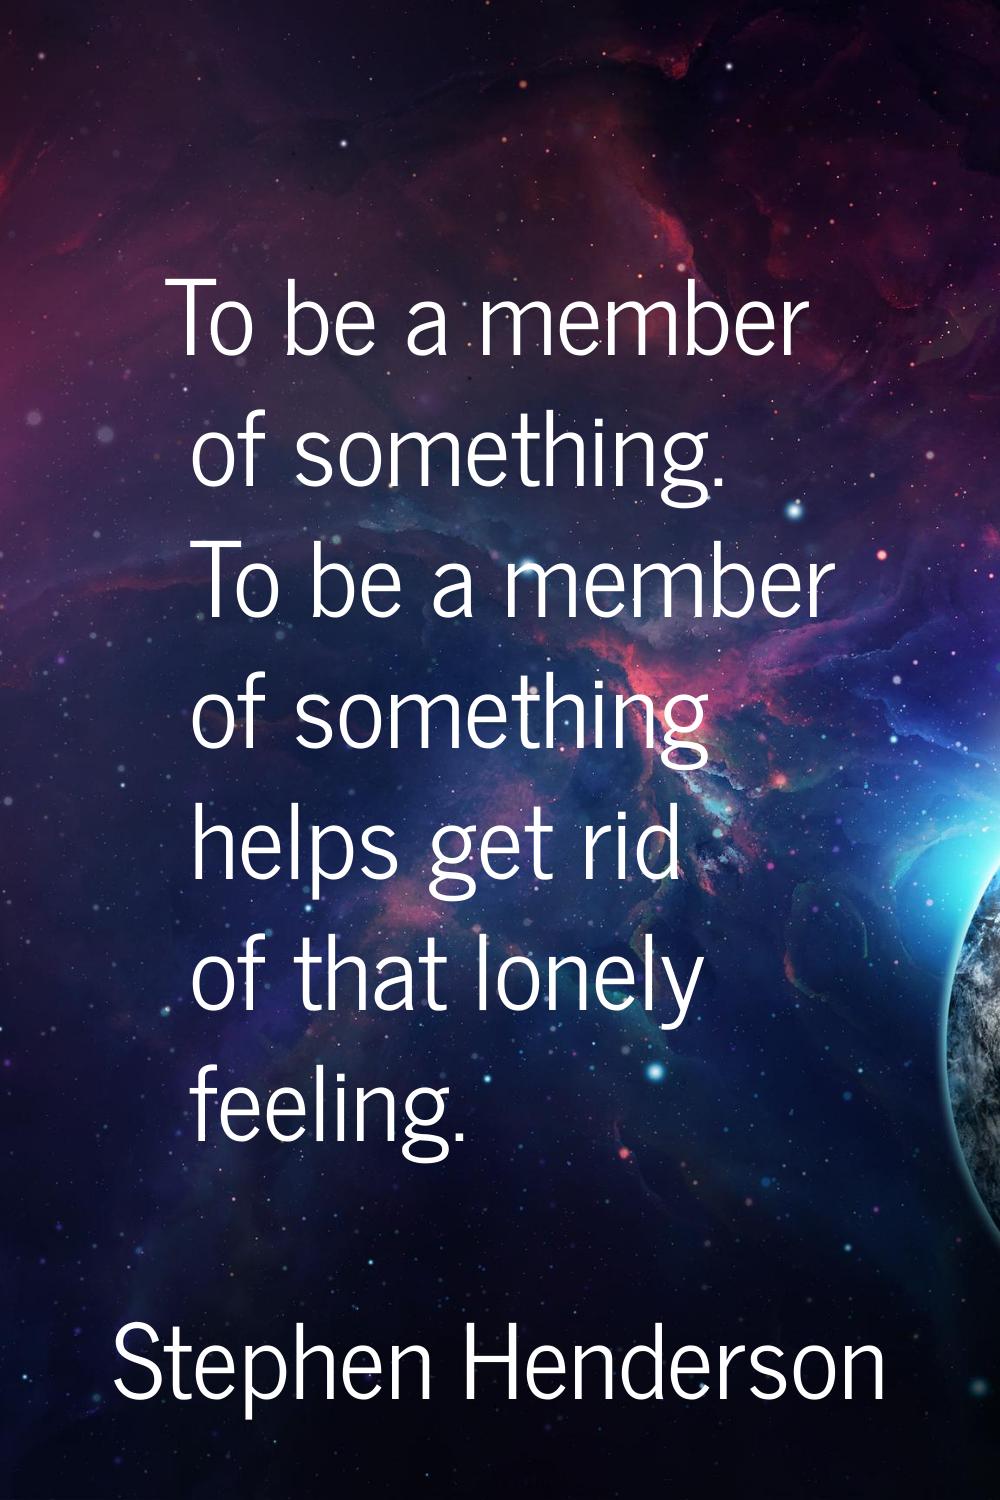 To be a member of something. To be a member of something helps get rid of that lonely feeling.